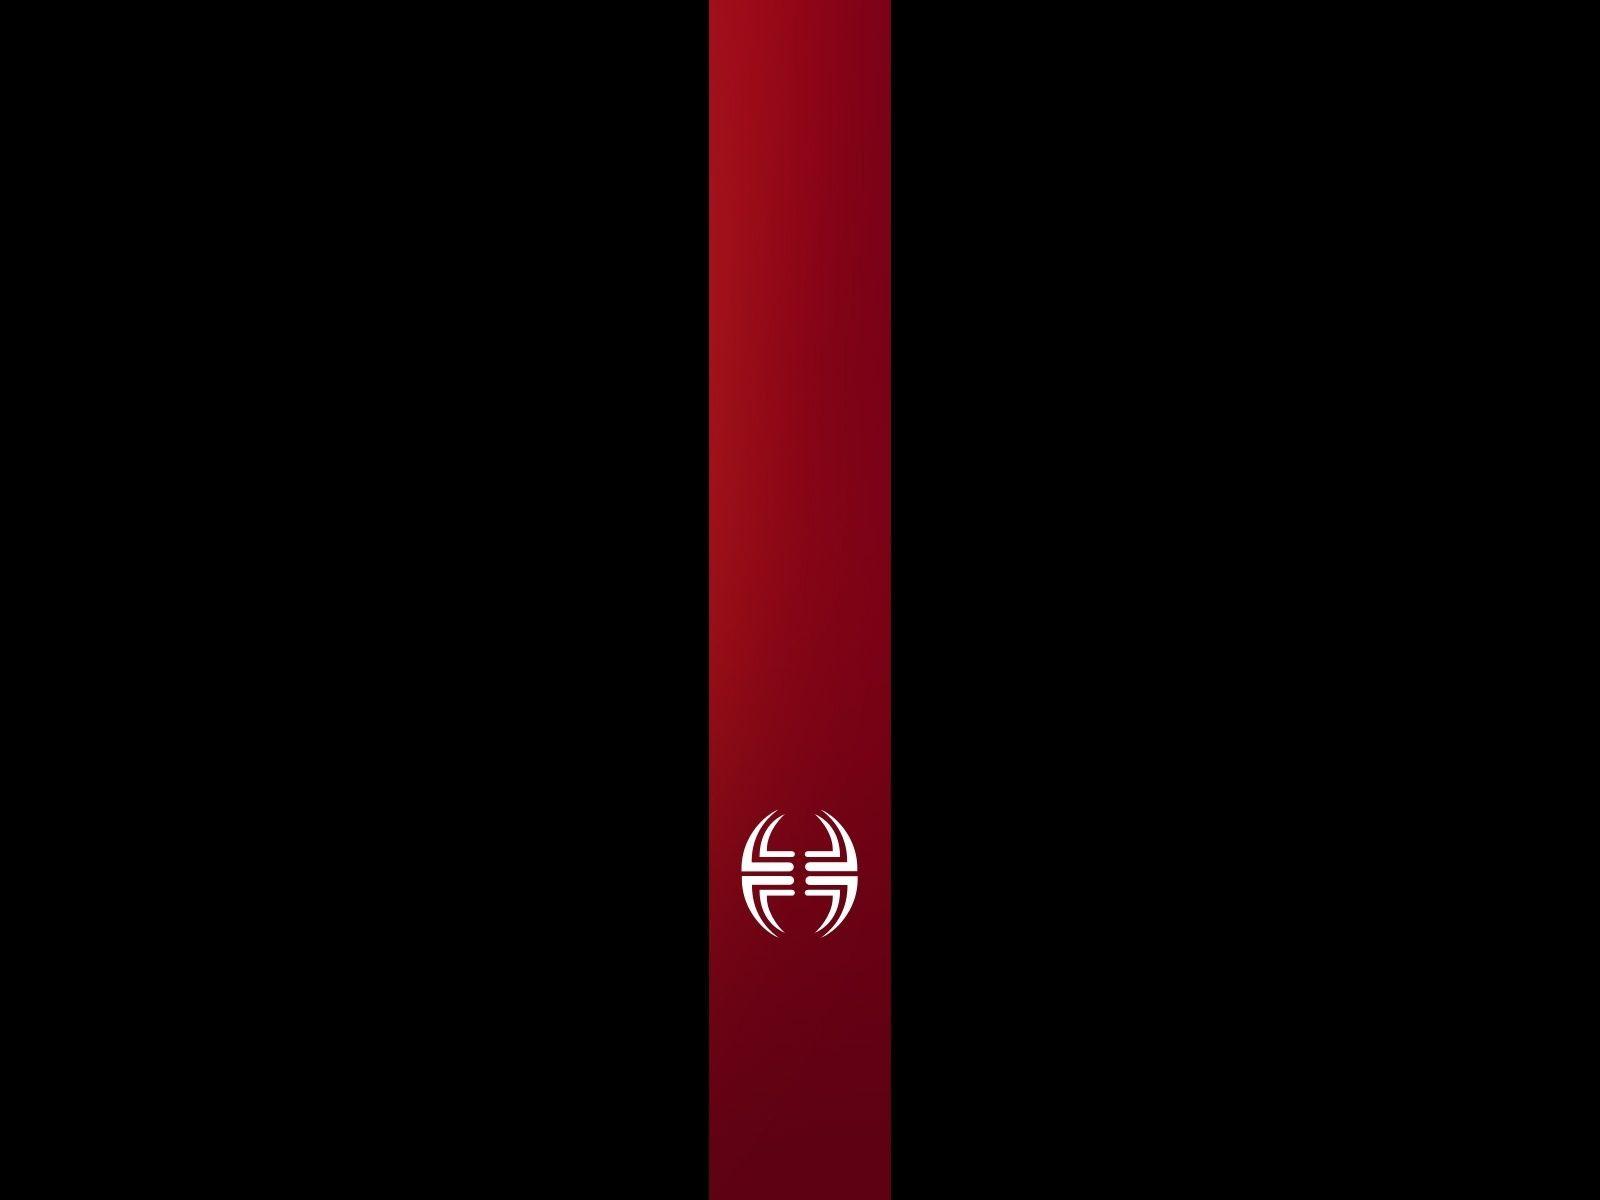 Red Line Wallpapers